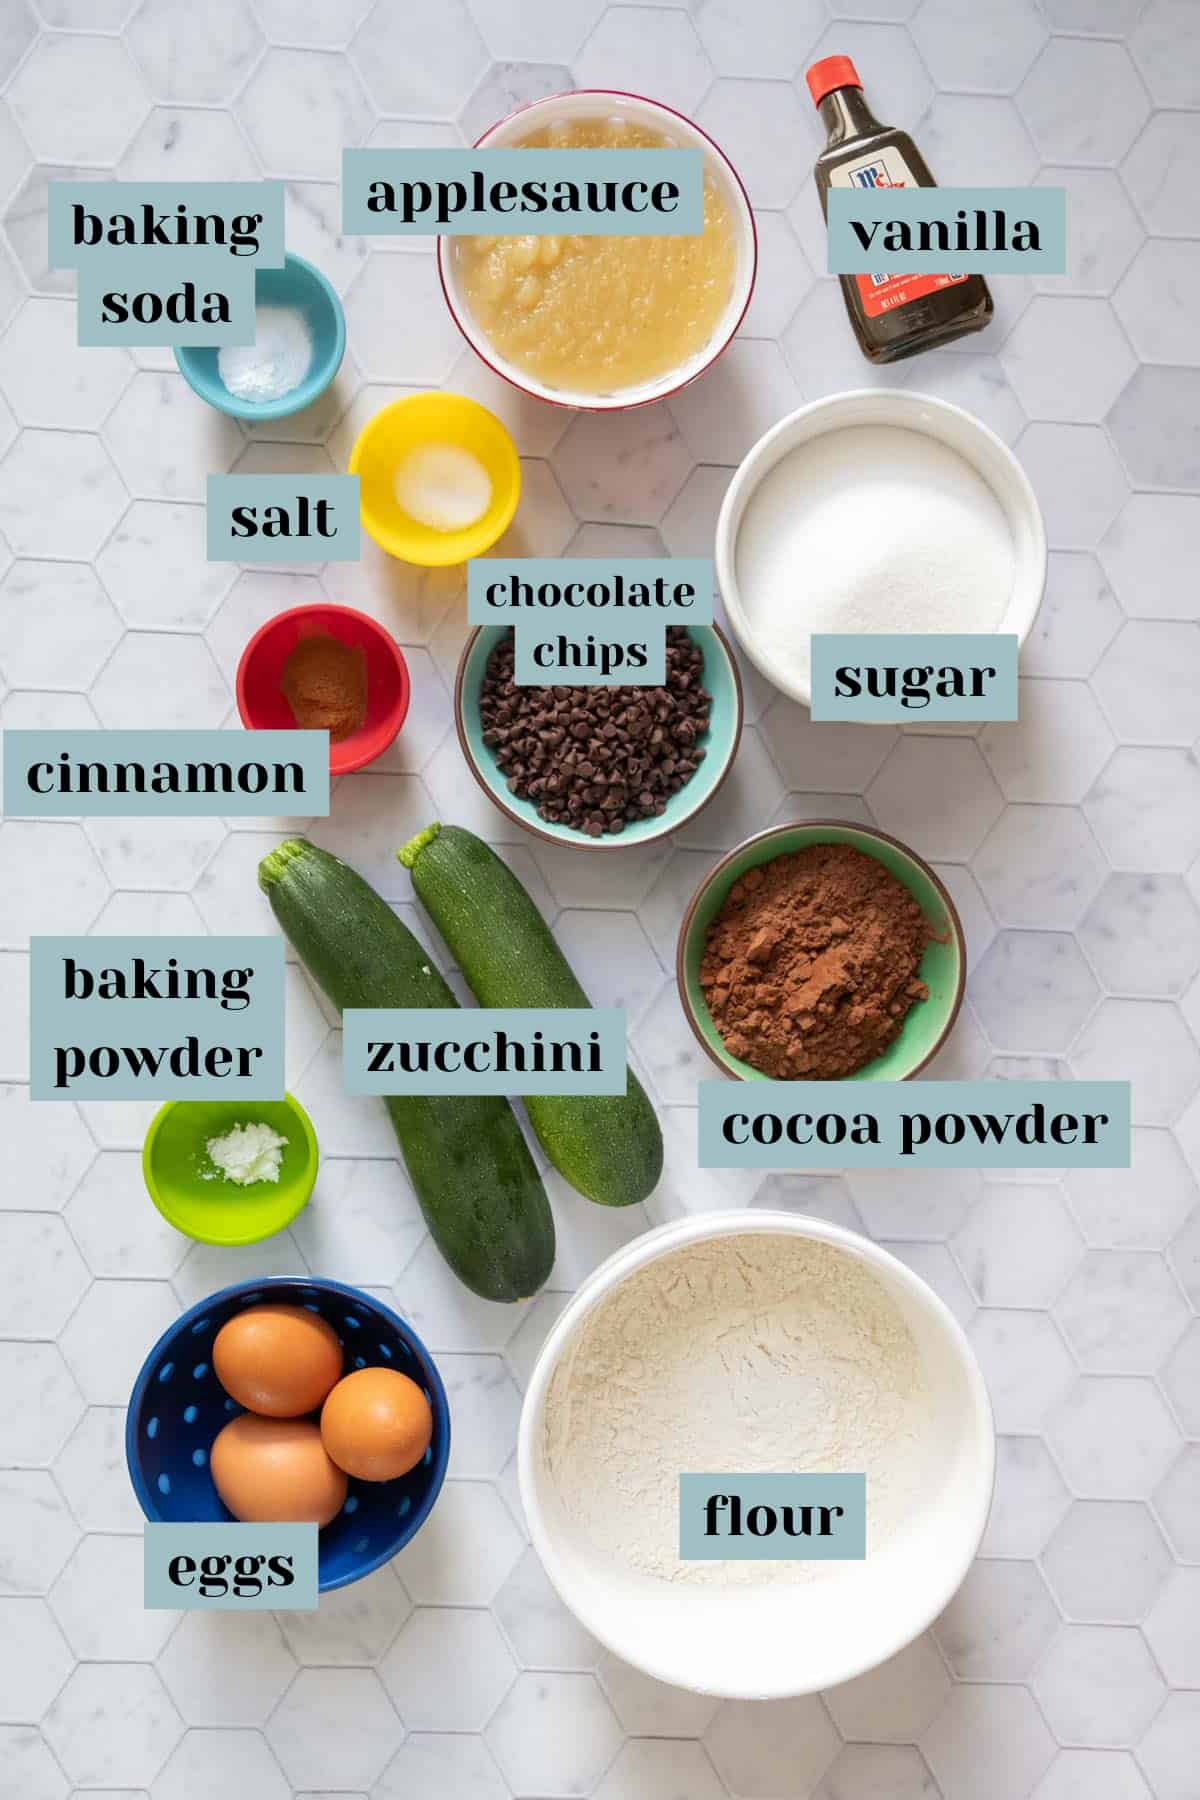 Ingredients for chocolate zucchini muffins on a tile surface with labels.